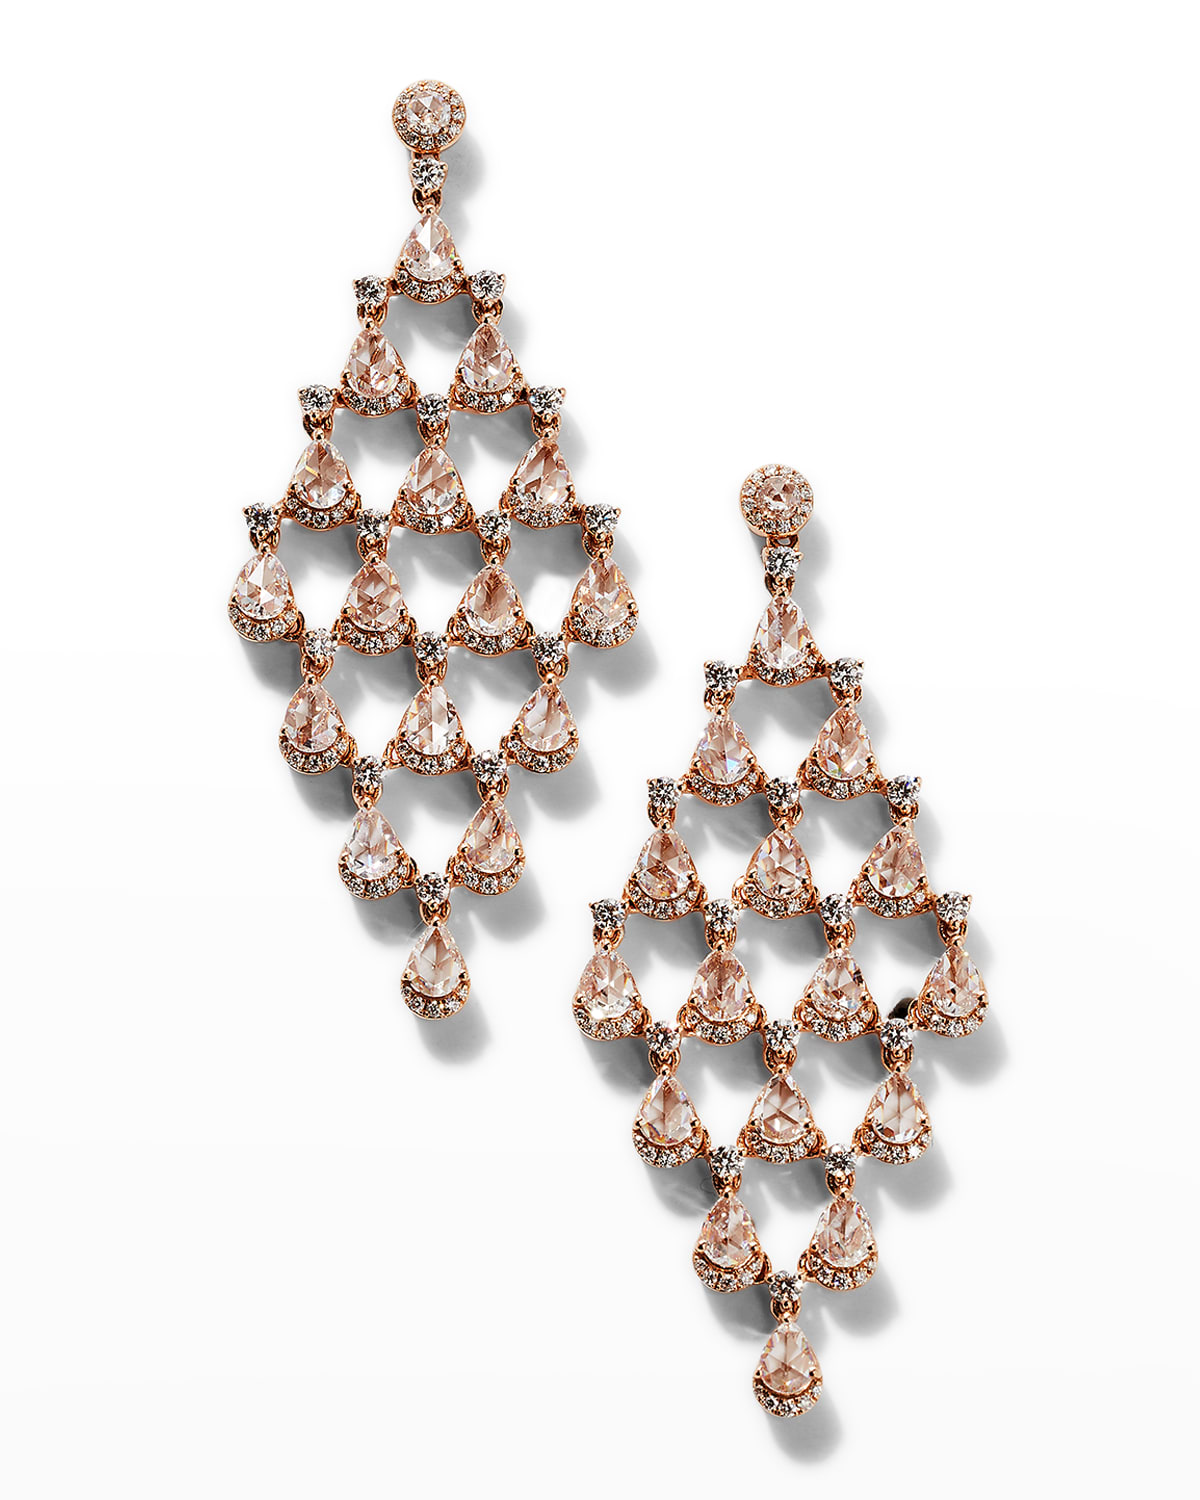 64 Facets Rose Gold Pear And Round Diamond Chandelier Earrings